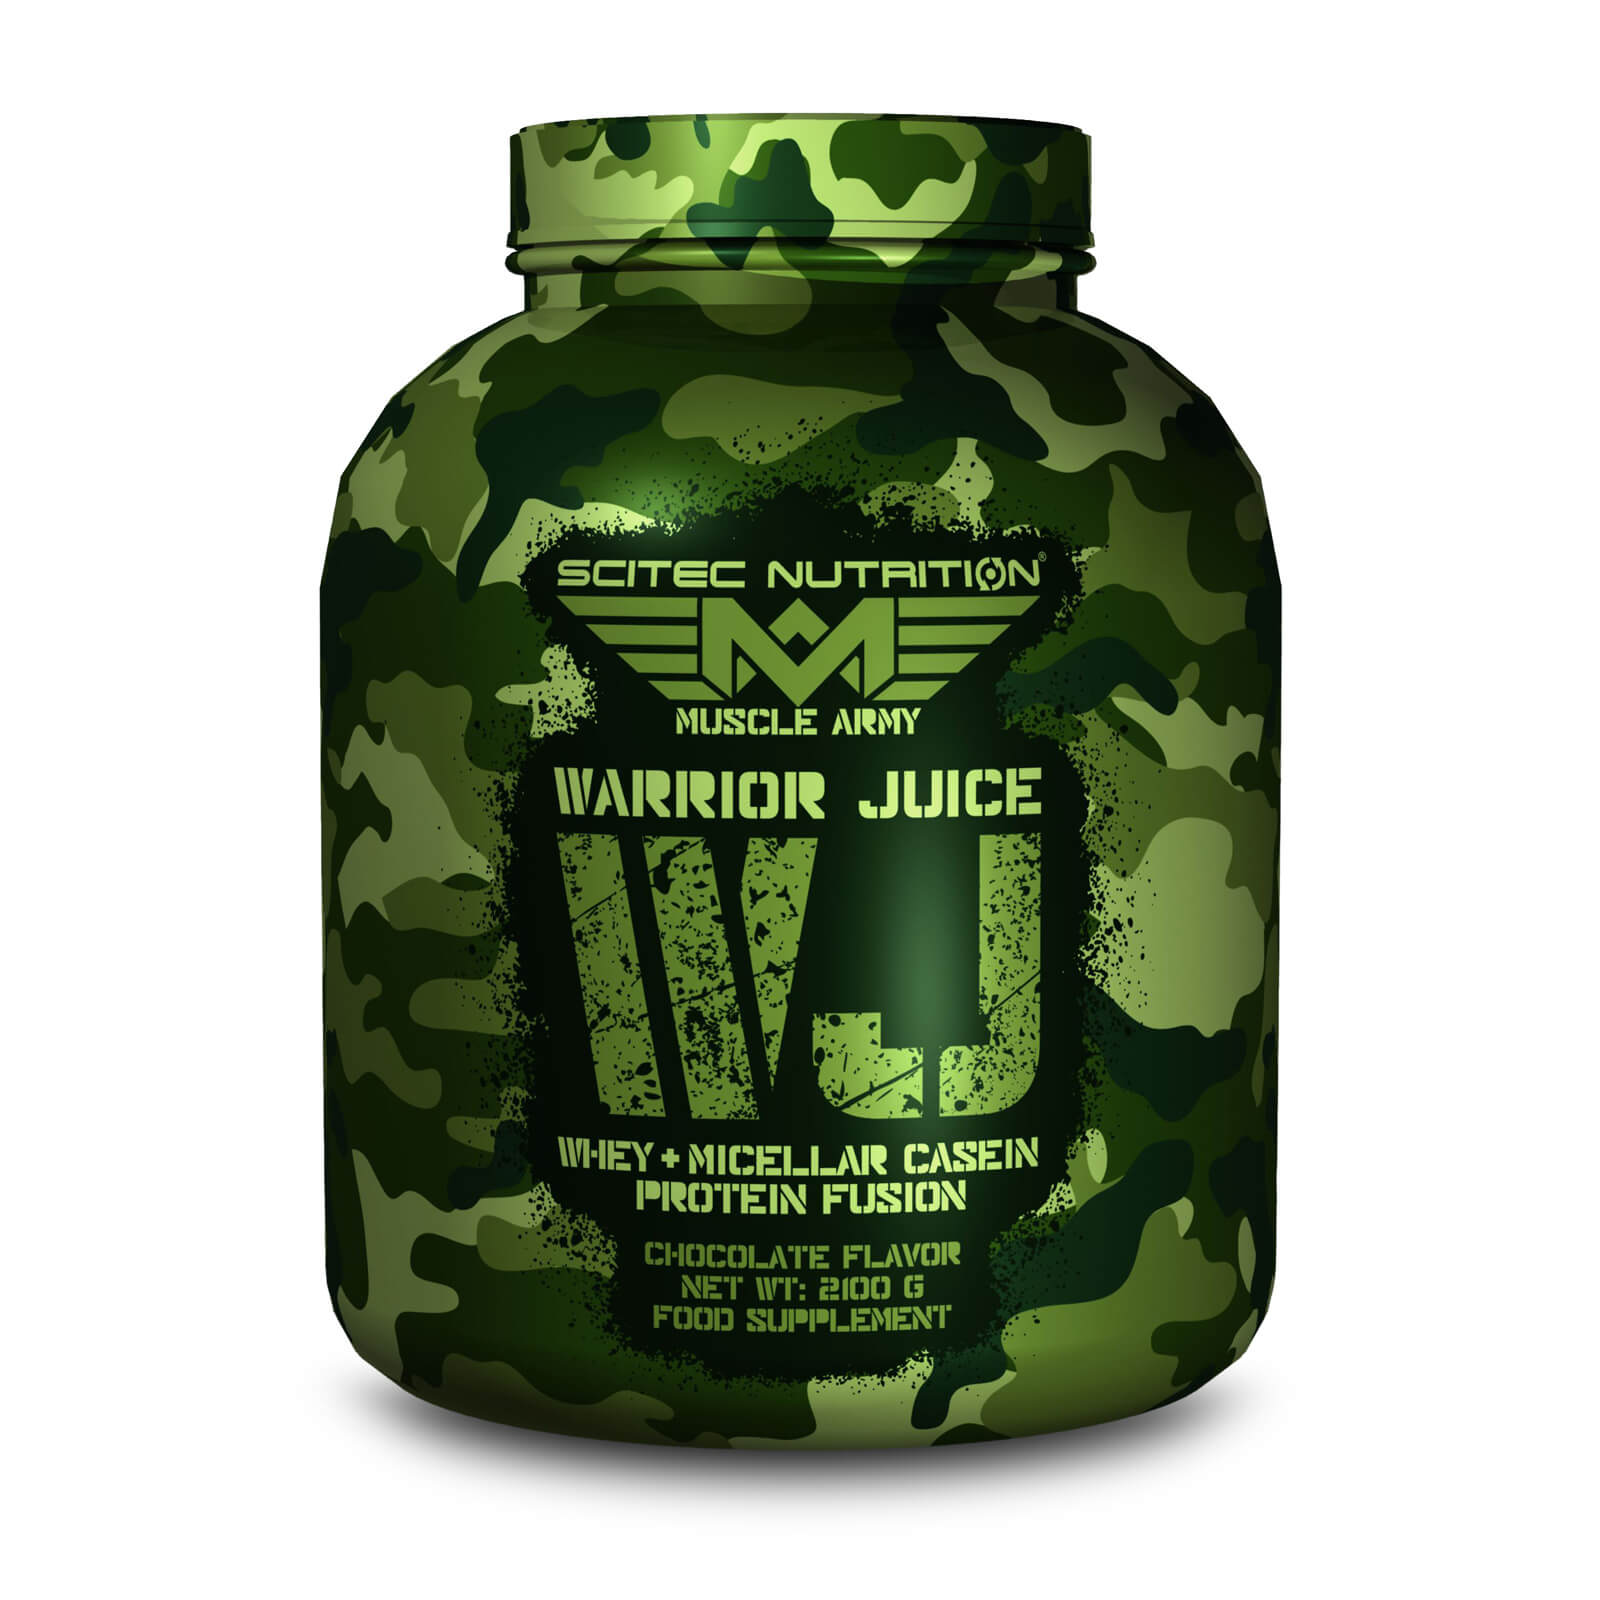 Warrior Juice, 2100 g, Muscle Army